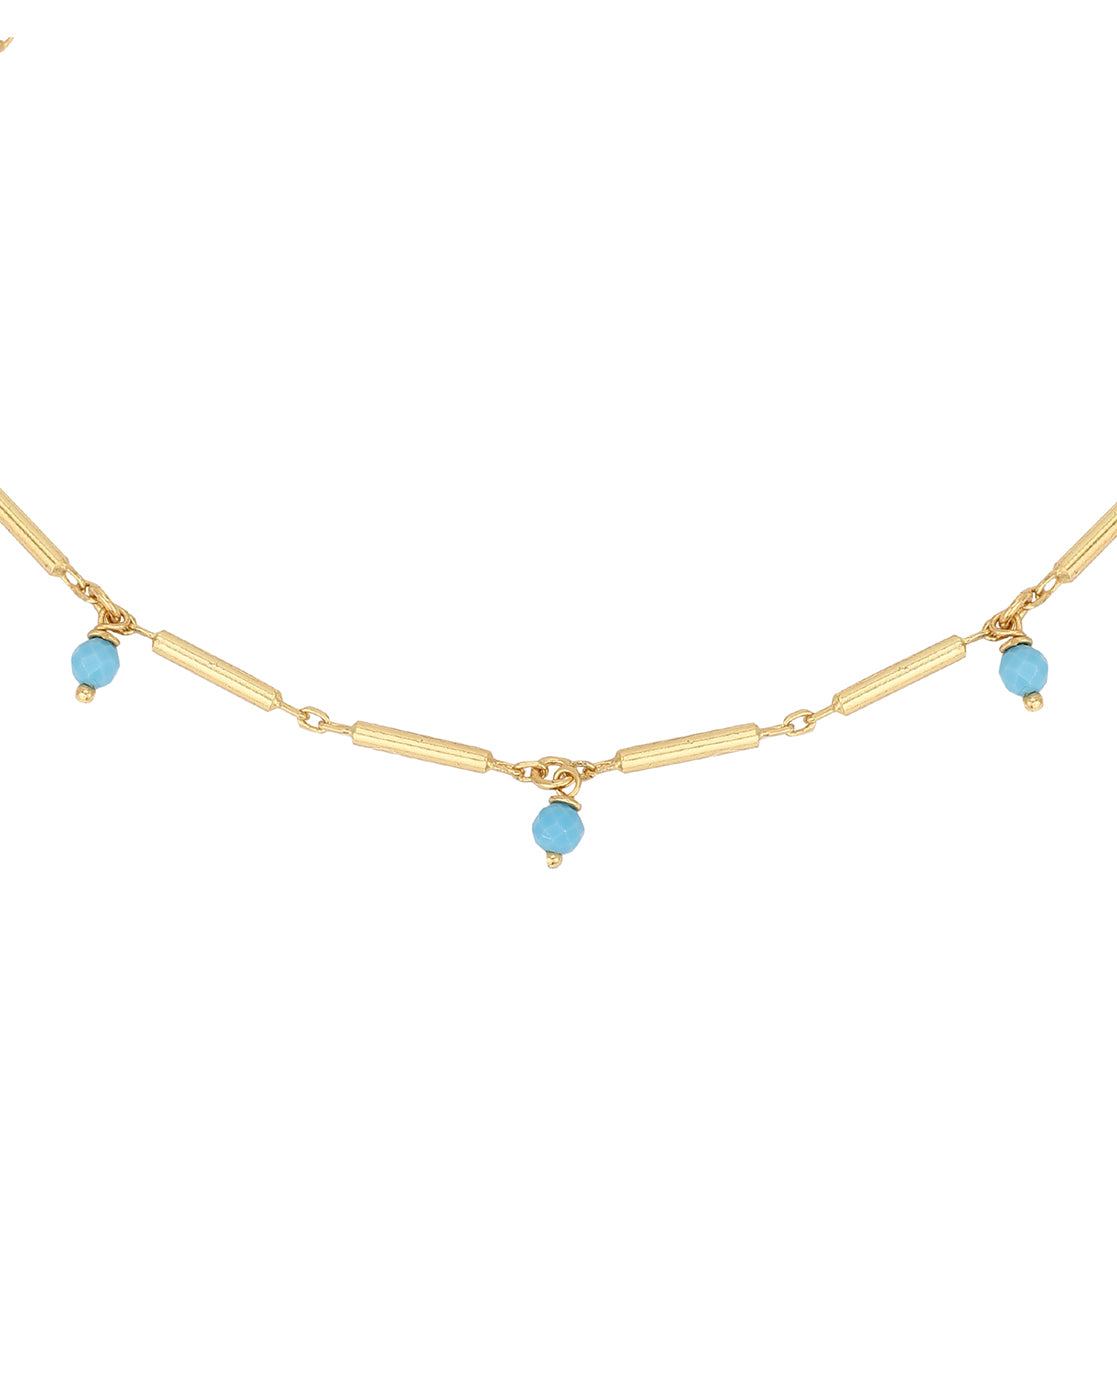 Carlton London Gold-Plated Blue Beads Anklet For Women